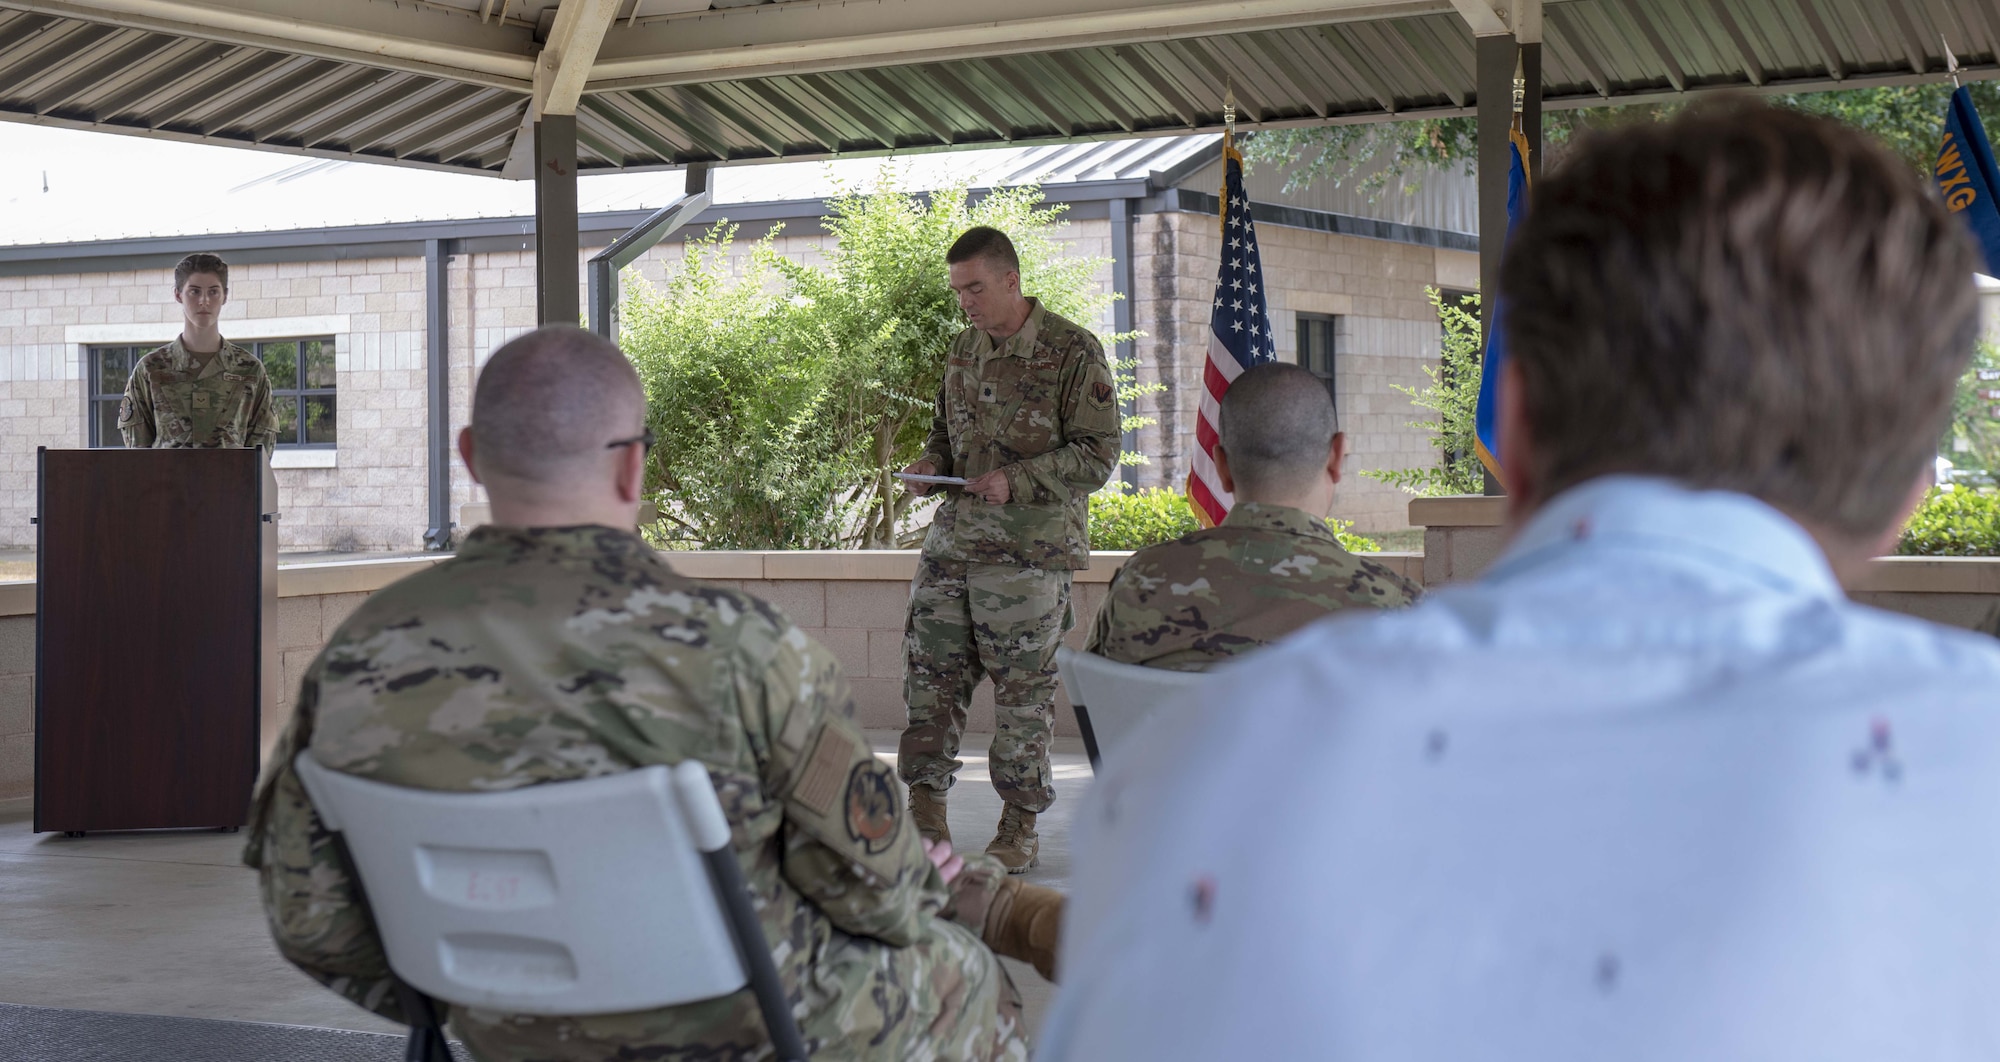 Lt. Col. Daniel Muggelberg addresses the 28th Operational Weather Squadron for the first time after assuming command during a ceremony on June 2, 2021, at Shaw Air Force Base, South Carolina.